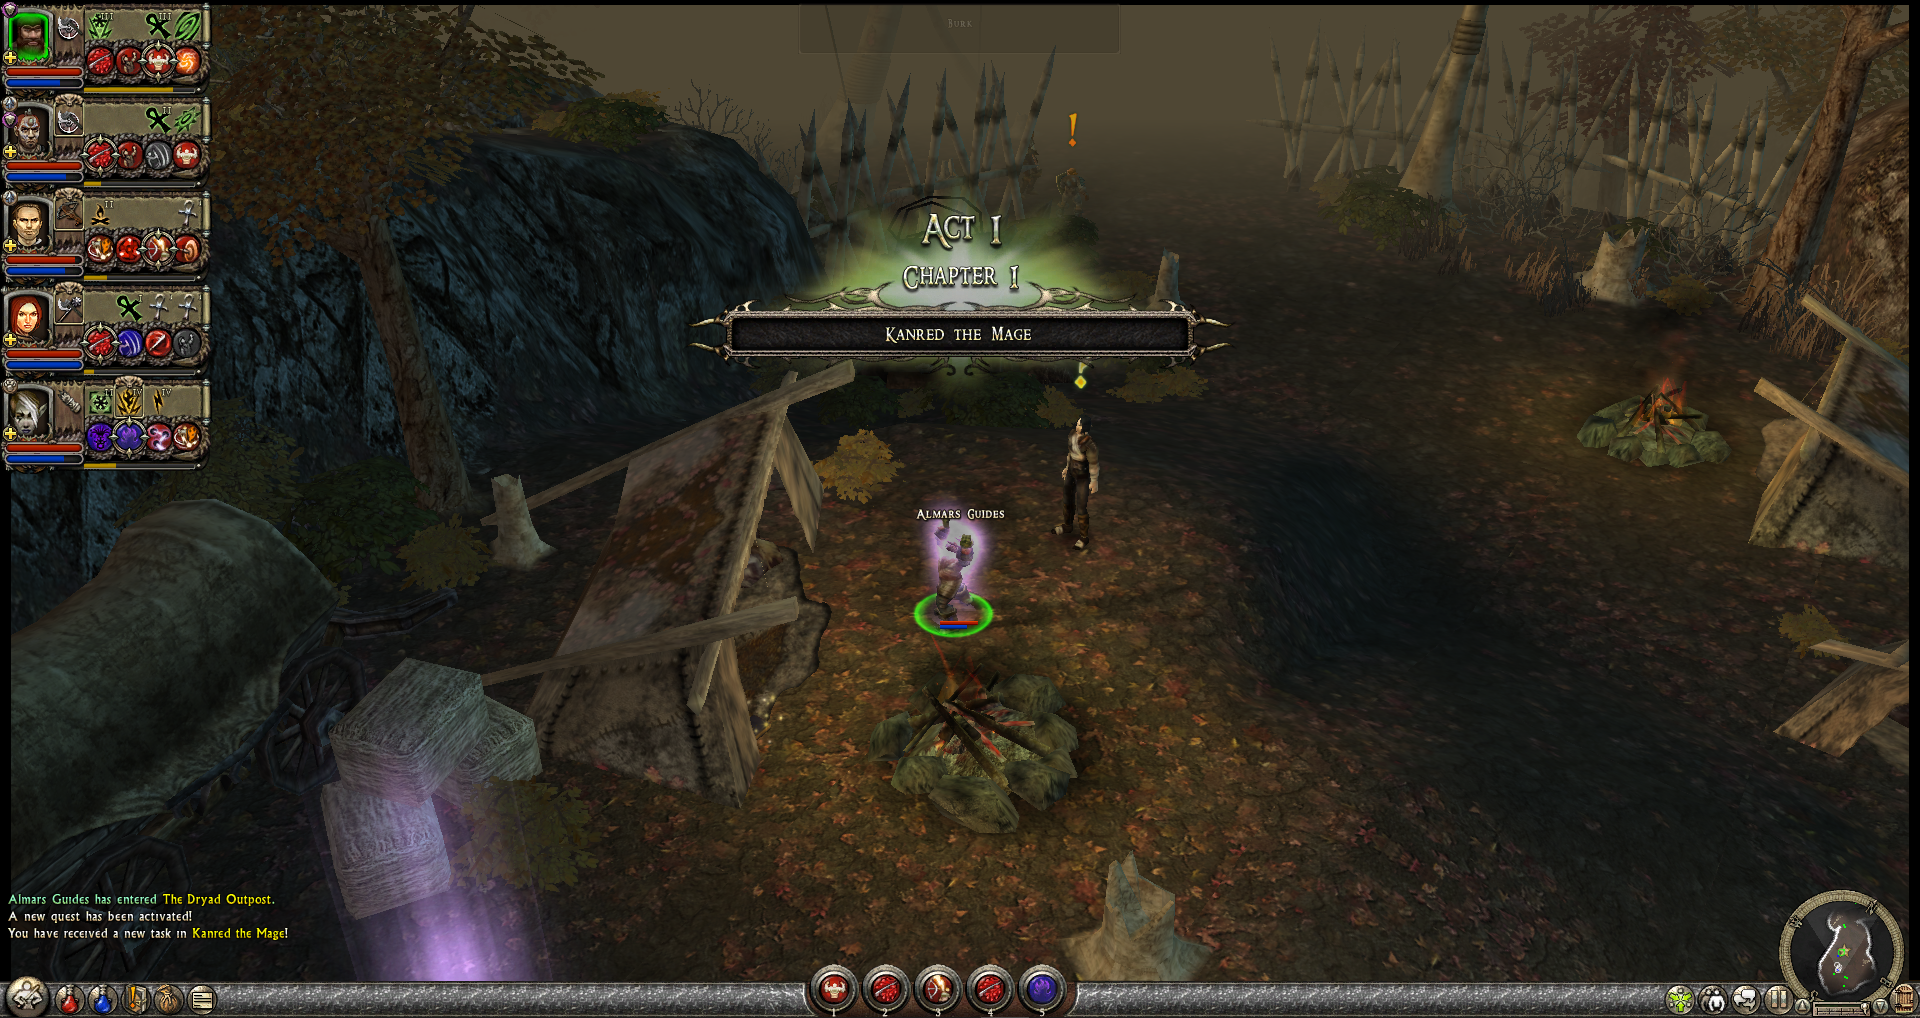 Kanred the Mage Quest Start